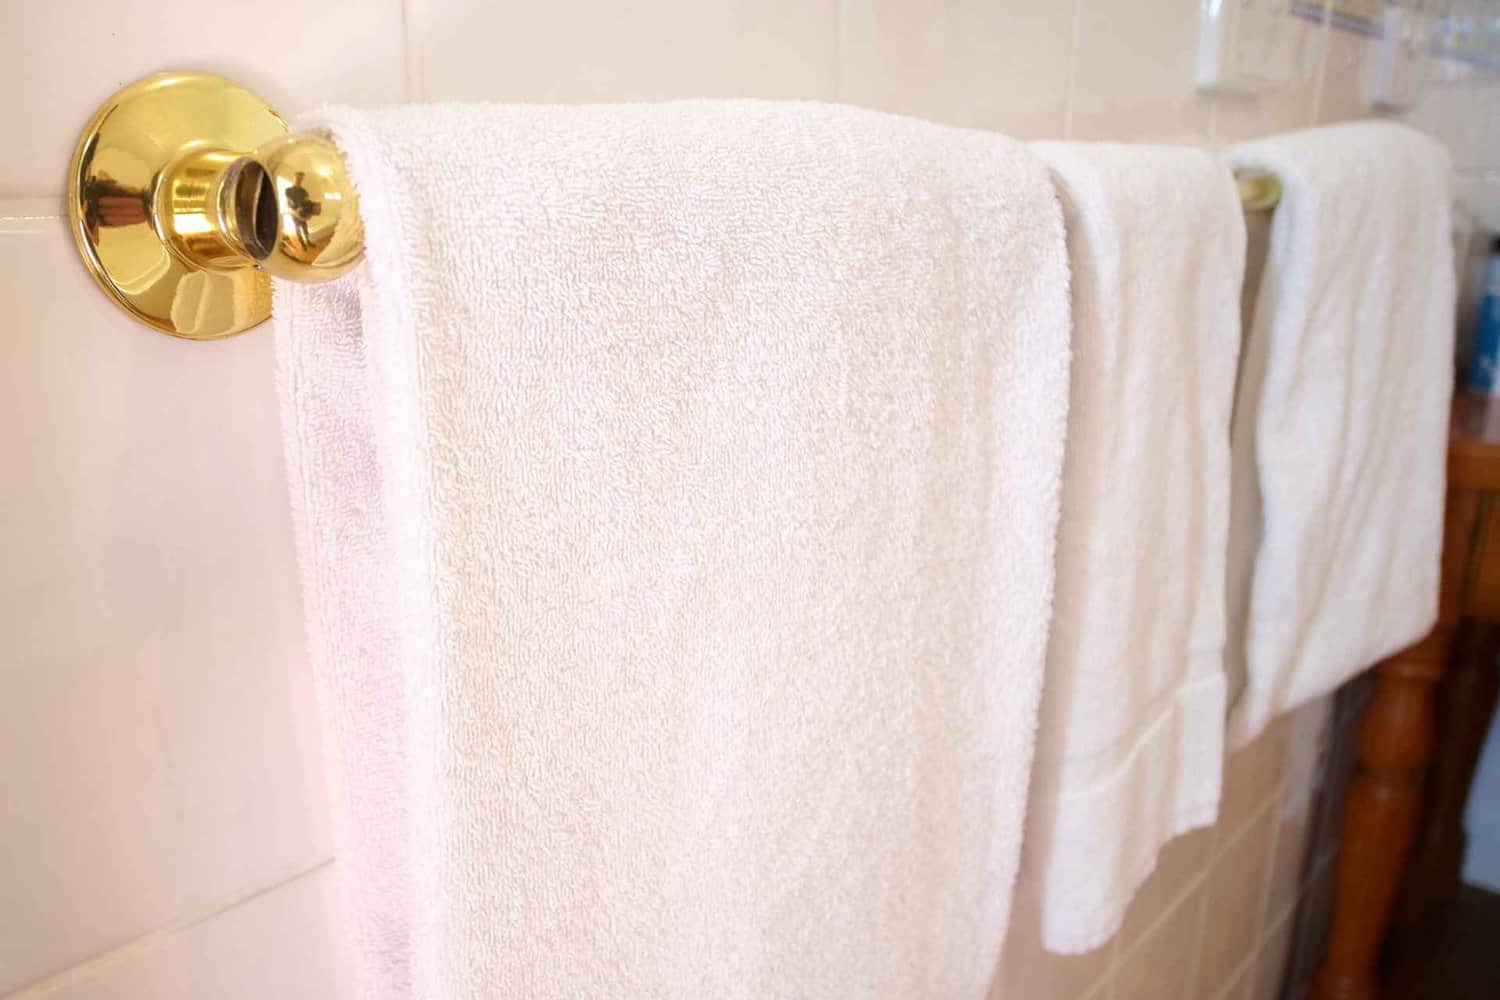 Fresh white towels hanging on a polished gold towel rack in a bathroom, conveying an air of cleanliness and attention to detail in guest accommodations.